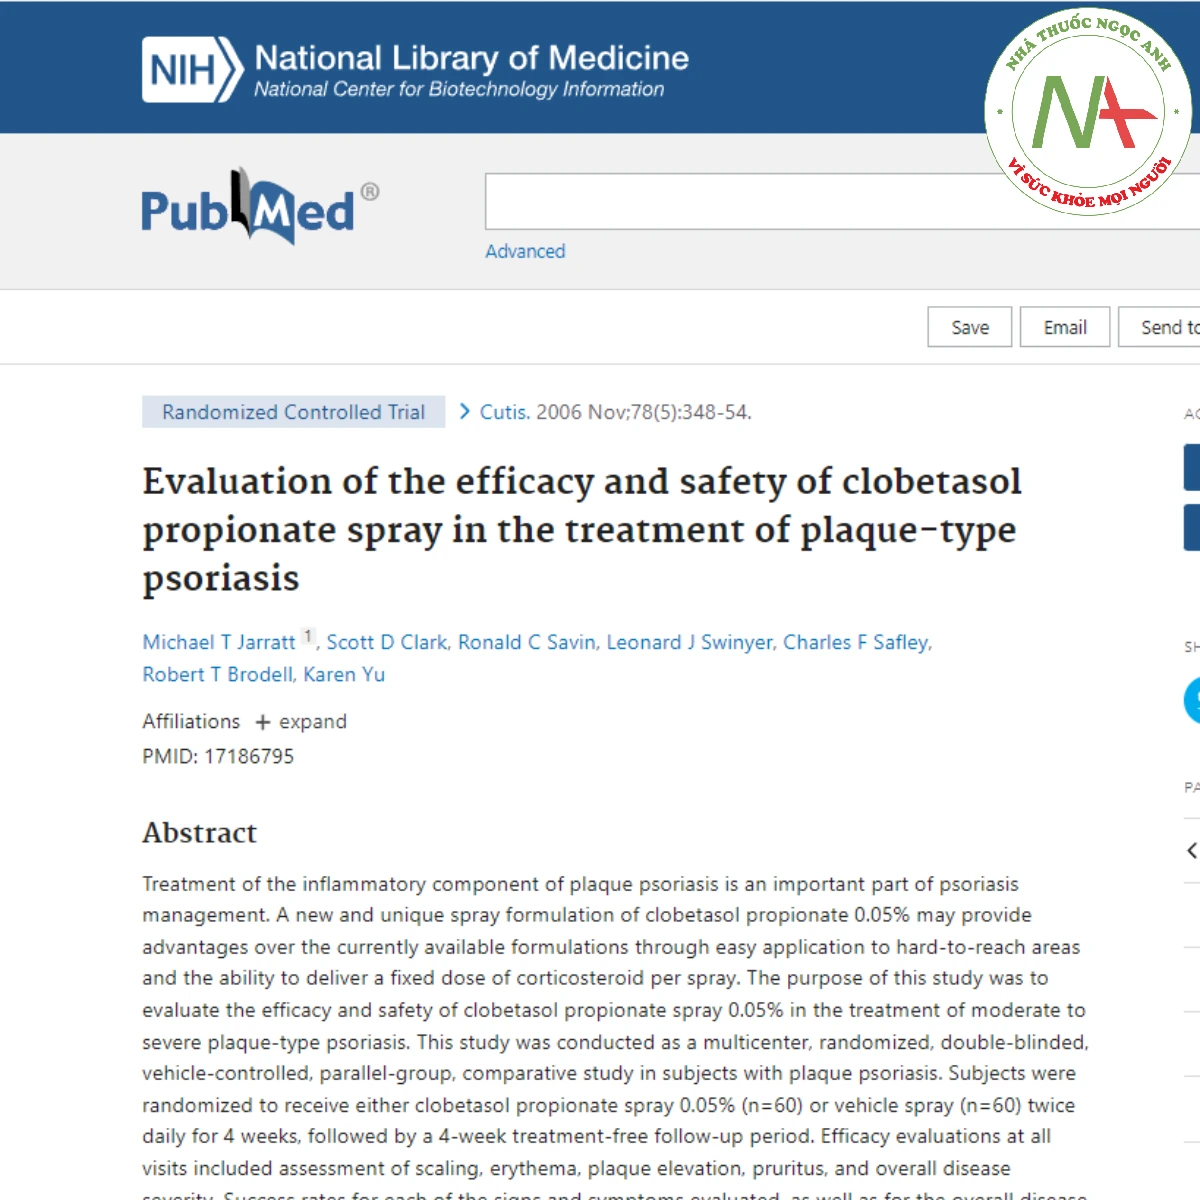 Evaluation of the efficacy and safety of clobetasol propionate spray in the treatment of plaque-type psoriasis